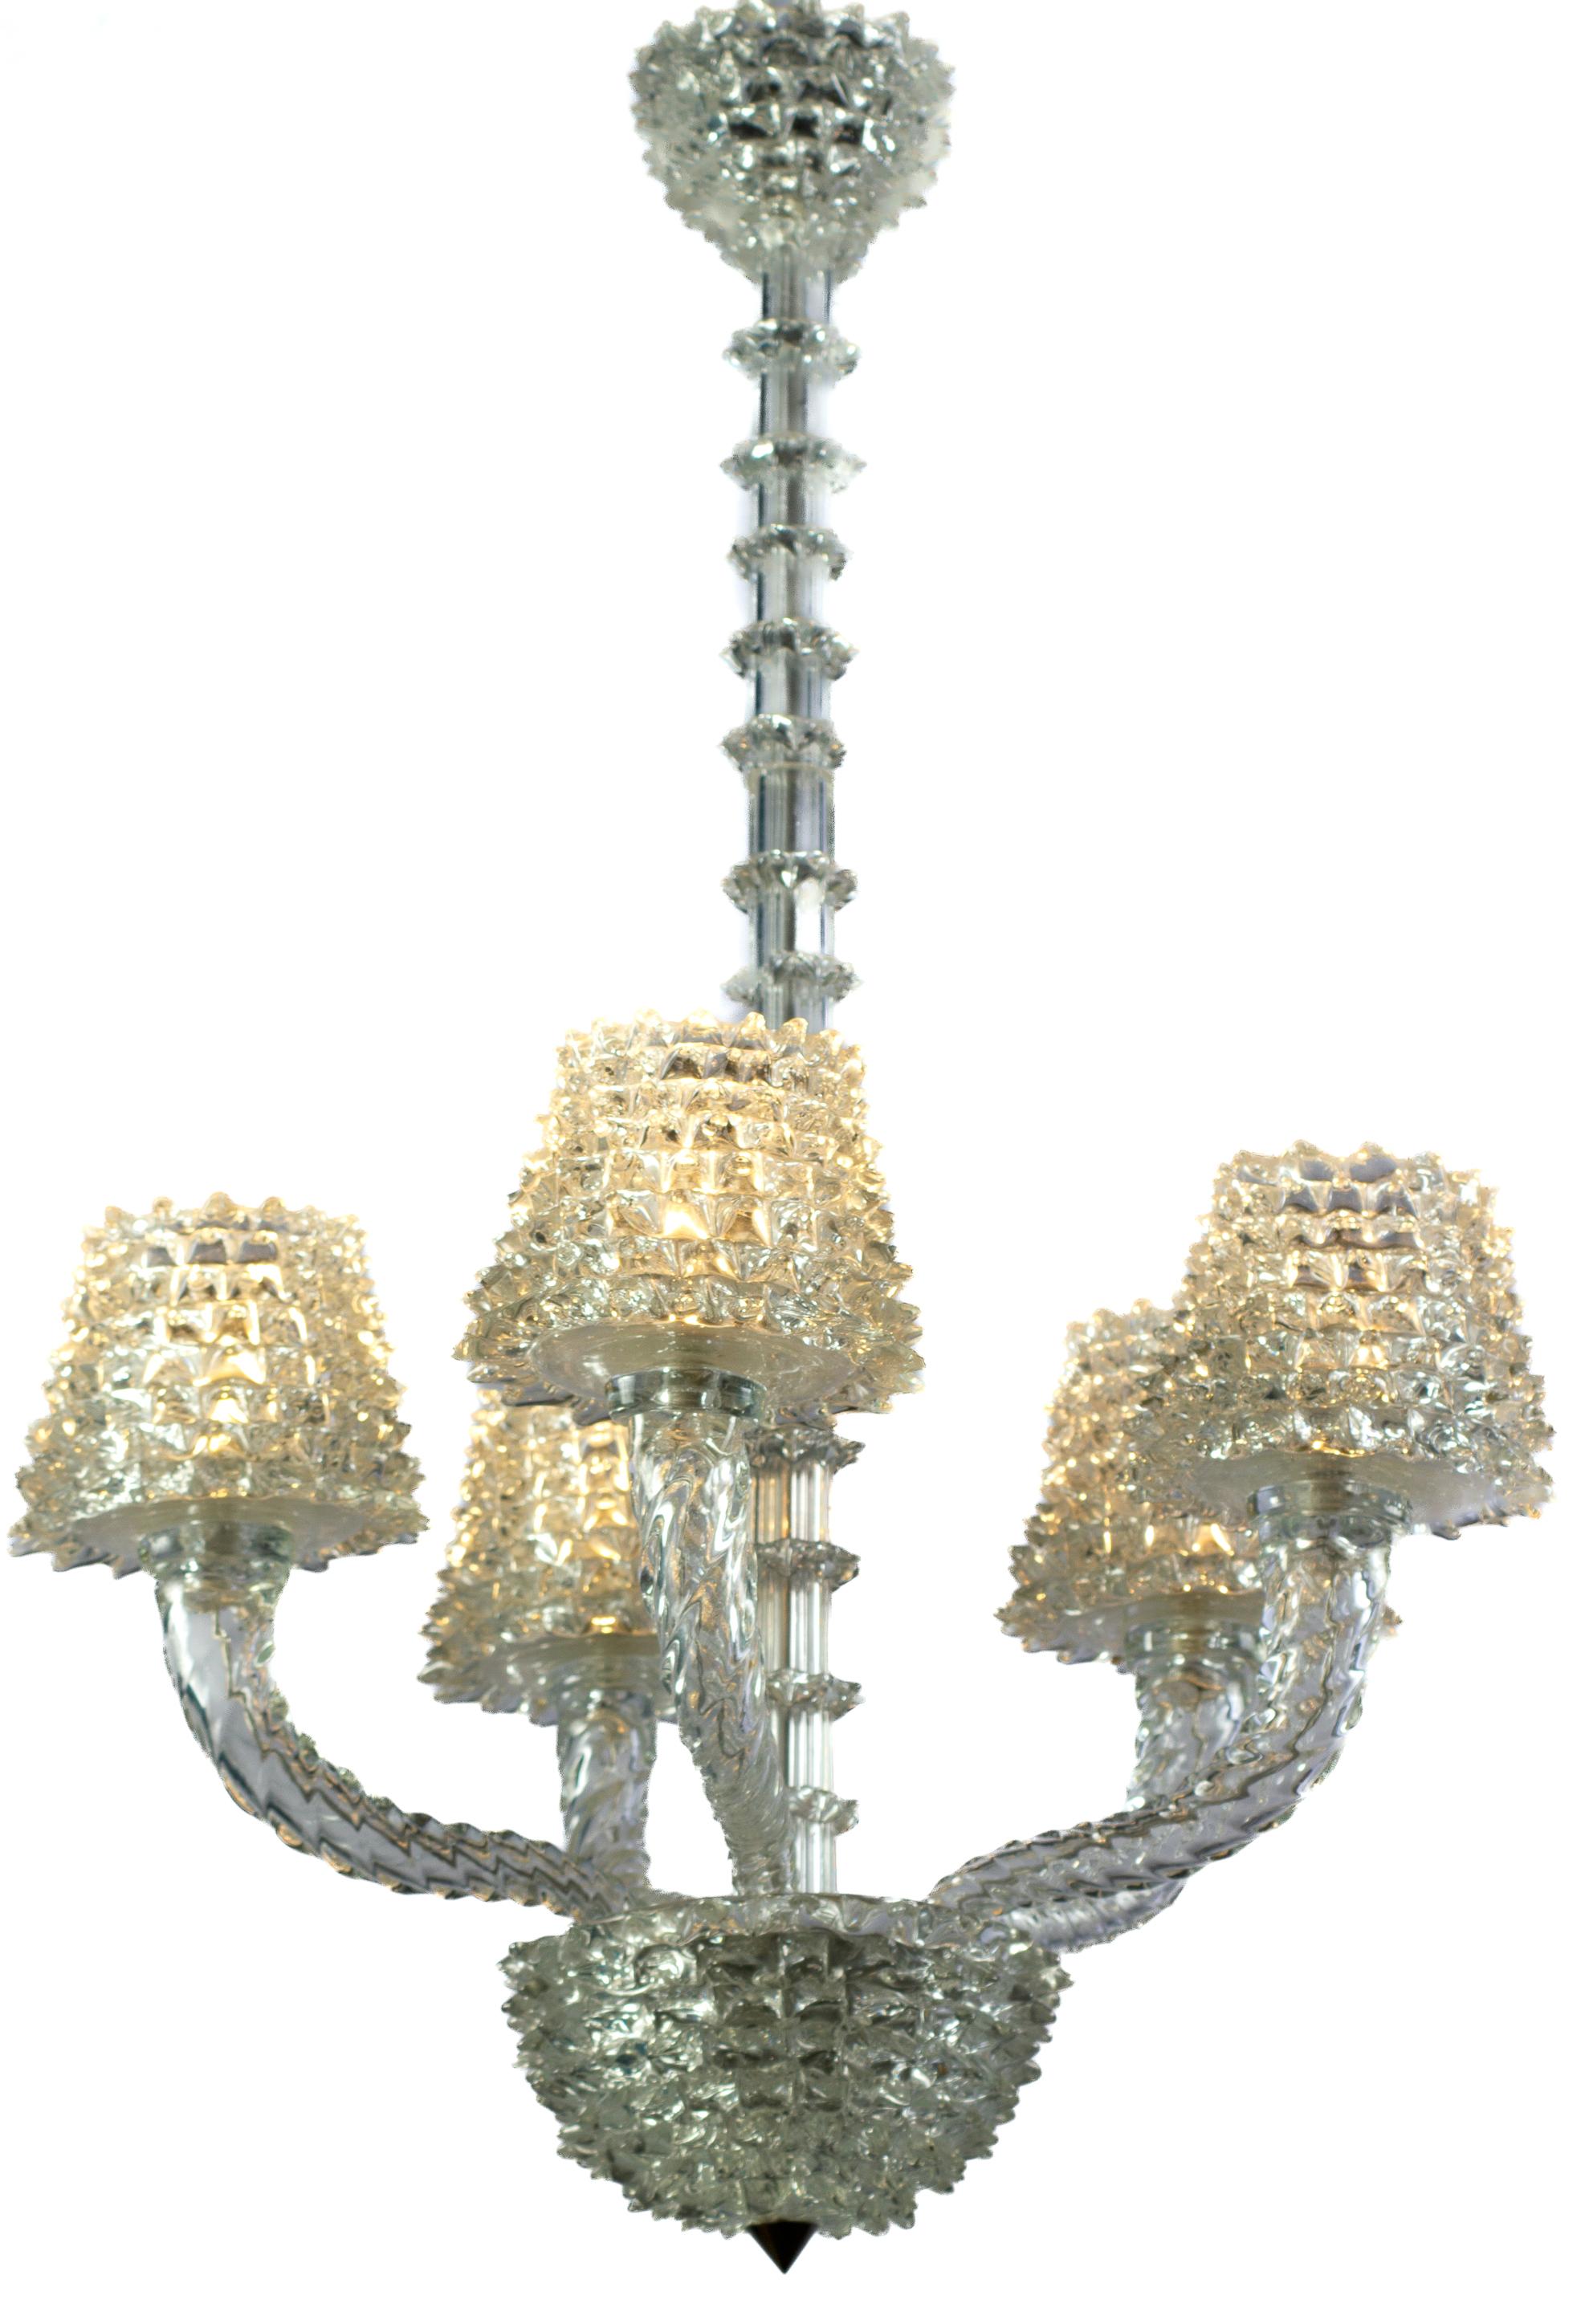 Blown Glass Spectacular Art Deco Rostrato Murano Glass Chandelier by Ercole Barovier, 1940